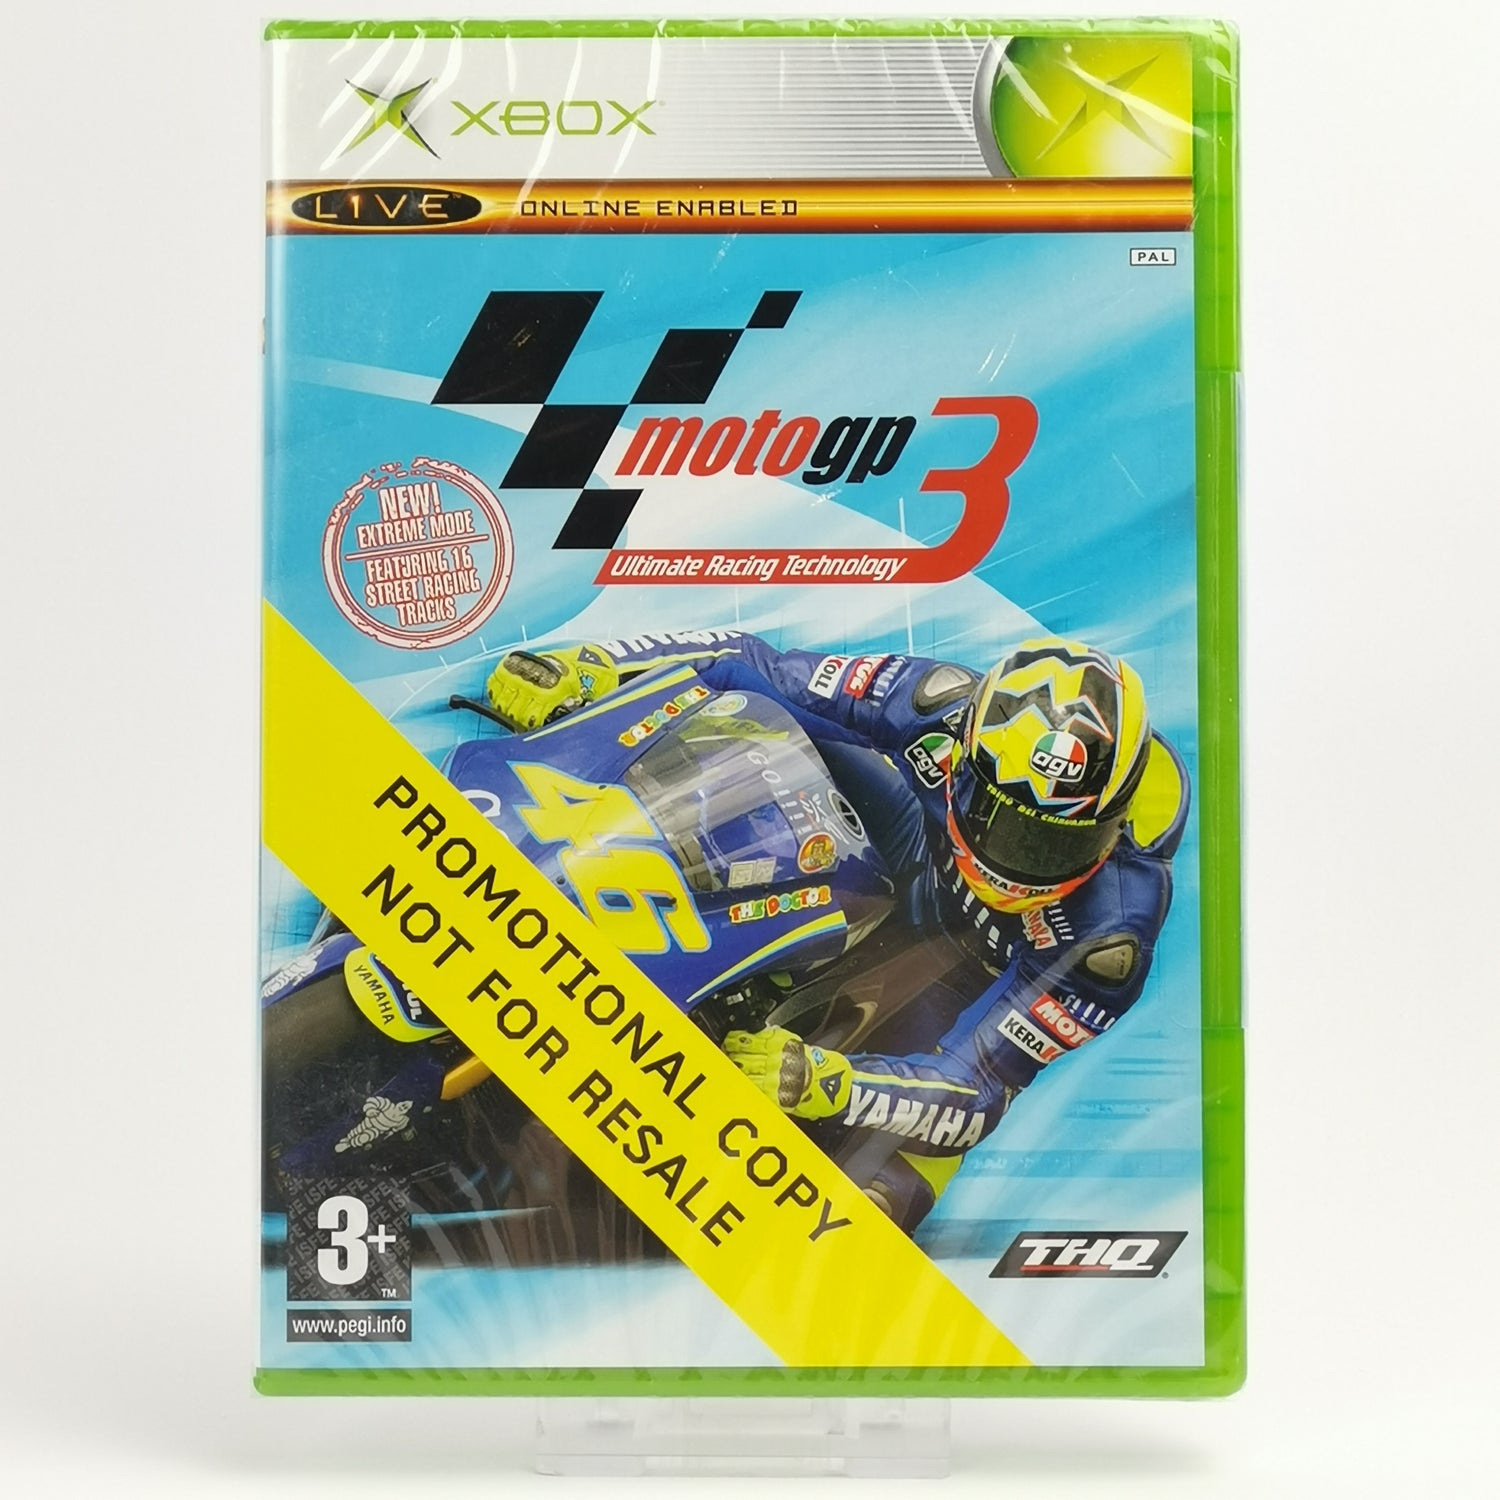 Microsoft Xbox Classic Promo: Moto GP 3 | Promotional Copy Not for Resale - NEW